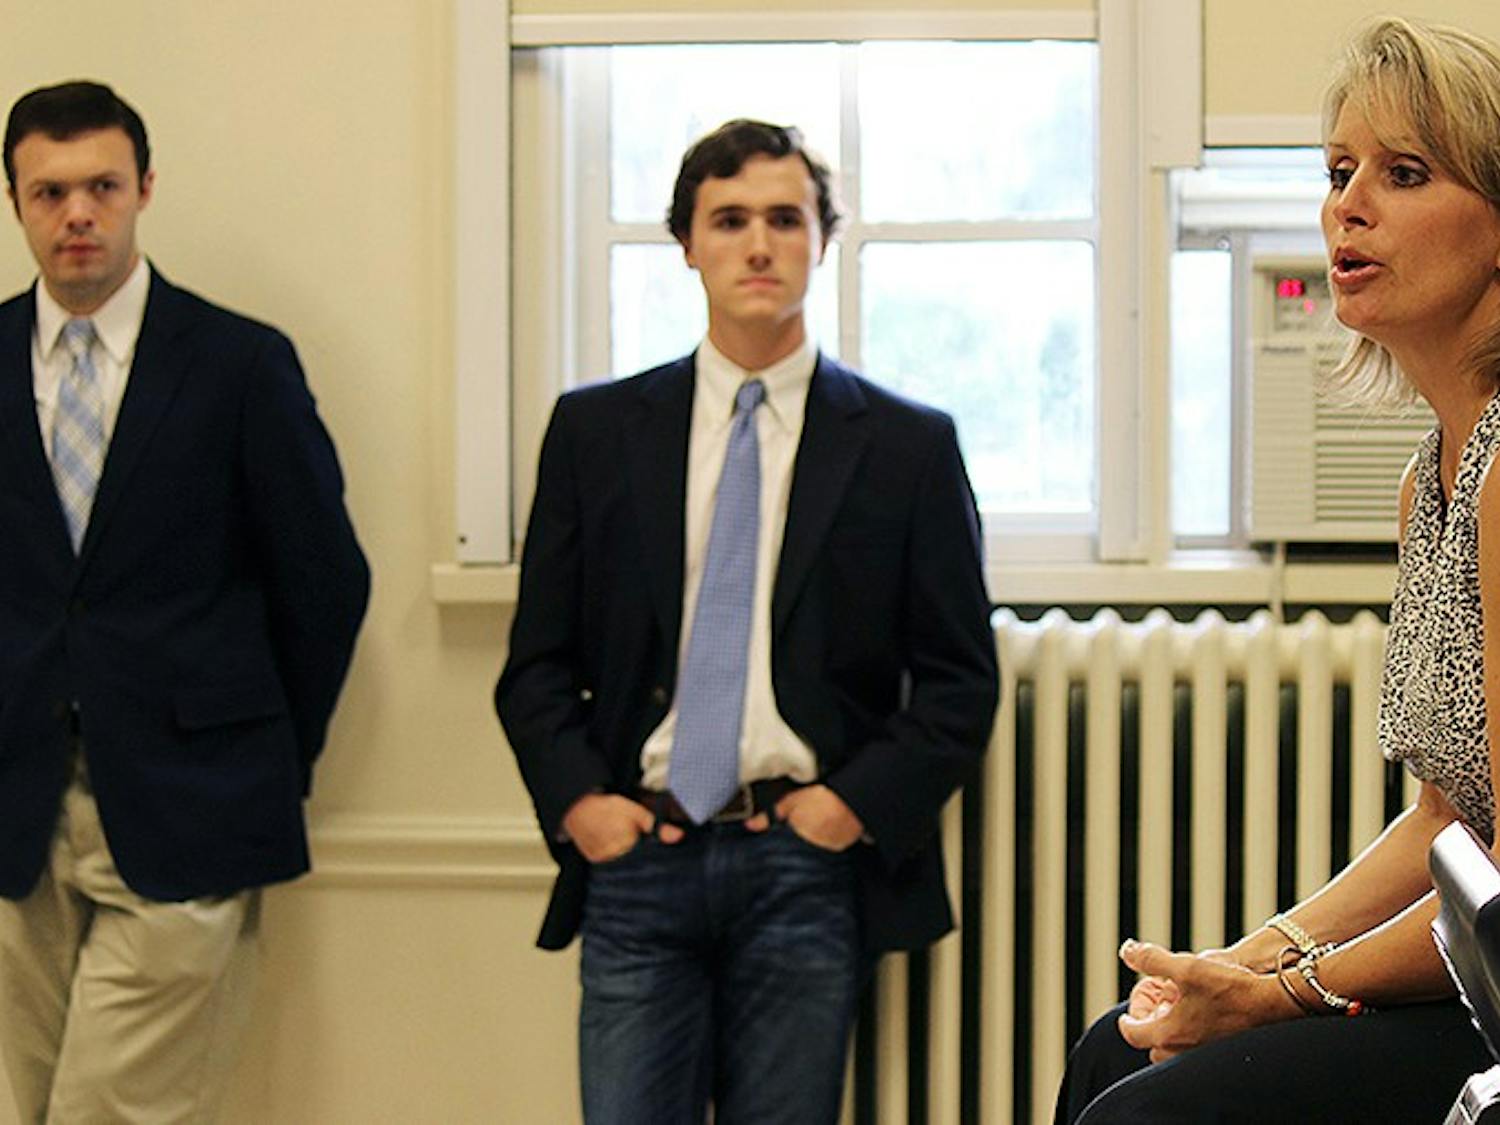 Congresswoman Rene Ellmers who Represents the 2nd District in North Carolina in the House of Representatives gives a speech to UNC College Republicans on Monday night in Bingham Hall.Peter N. McClelland (right) Political Science/ History MajorBenjamin Smith (left) Political Science/ History Major